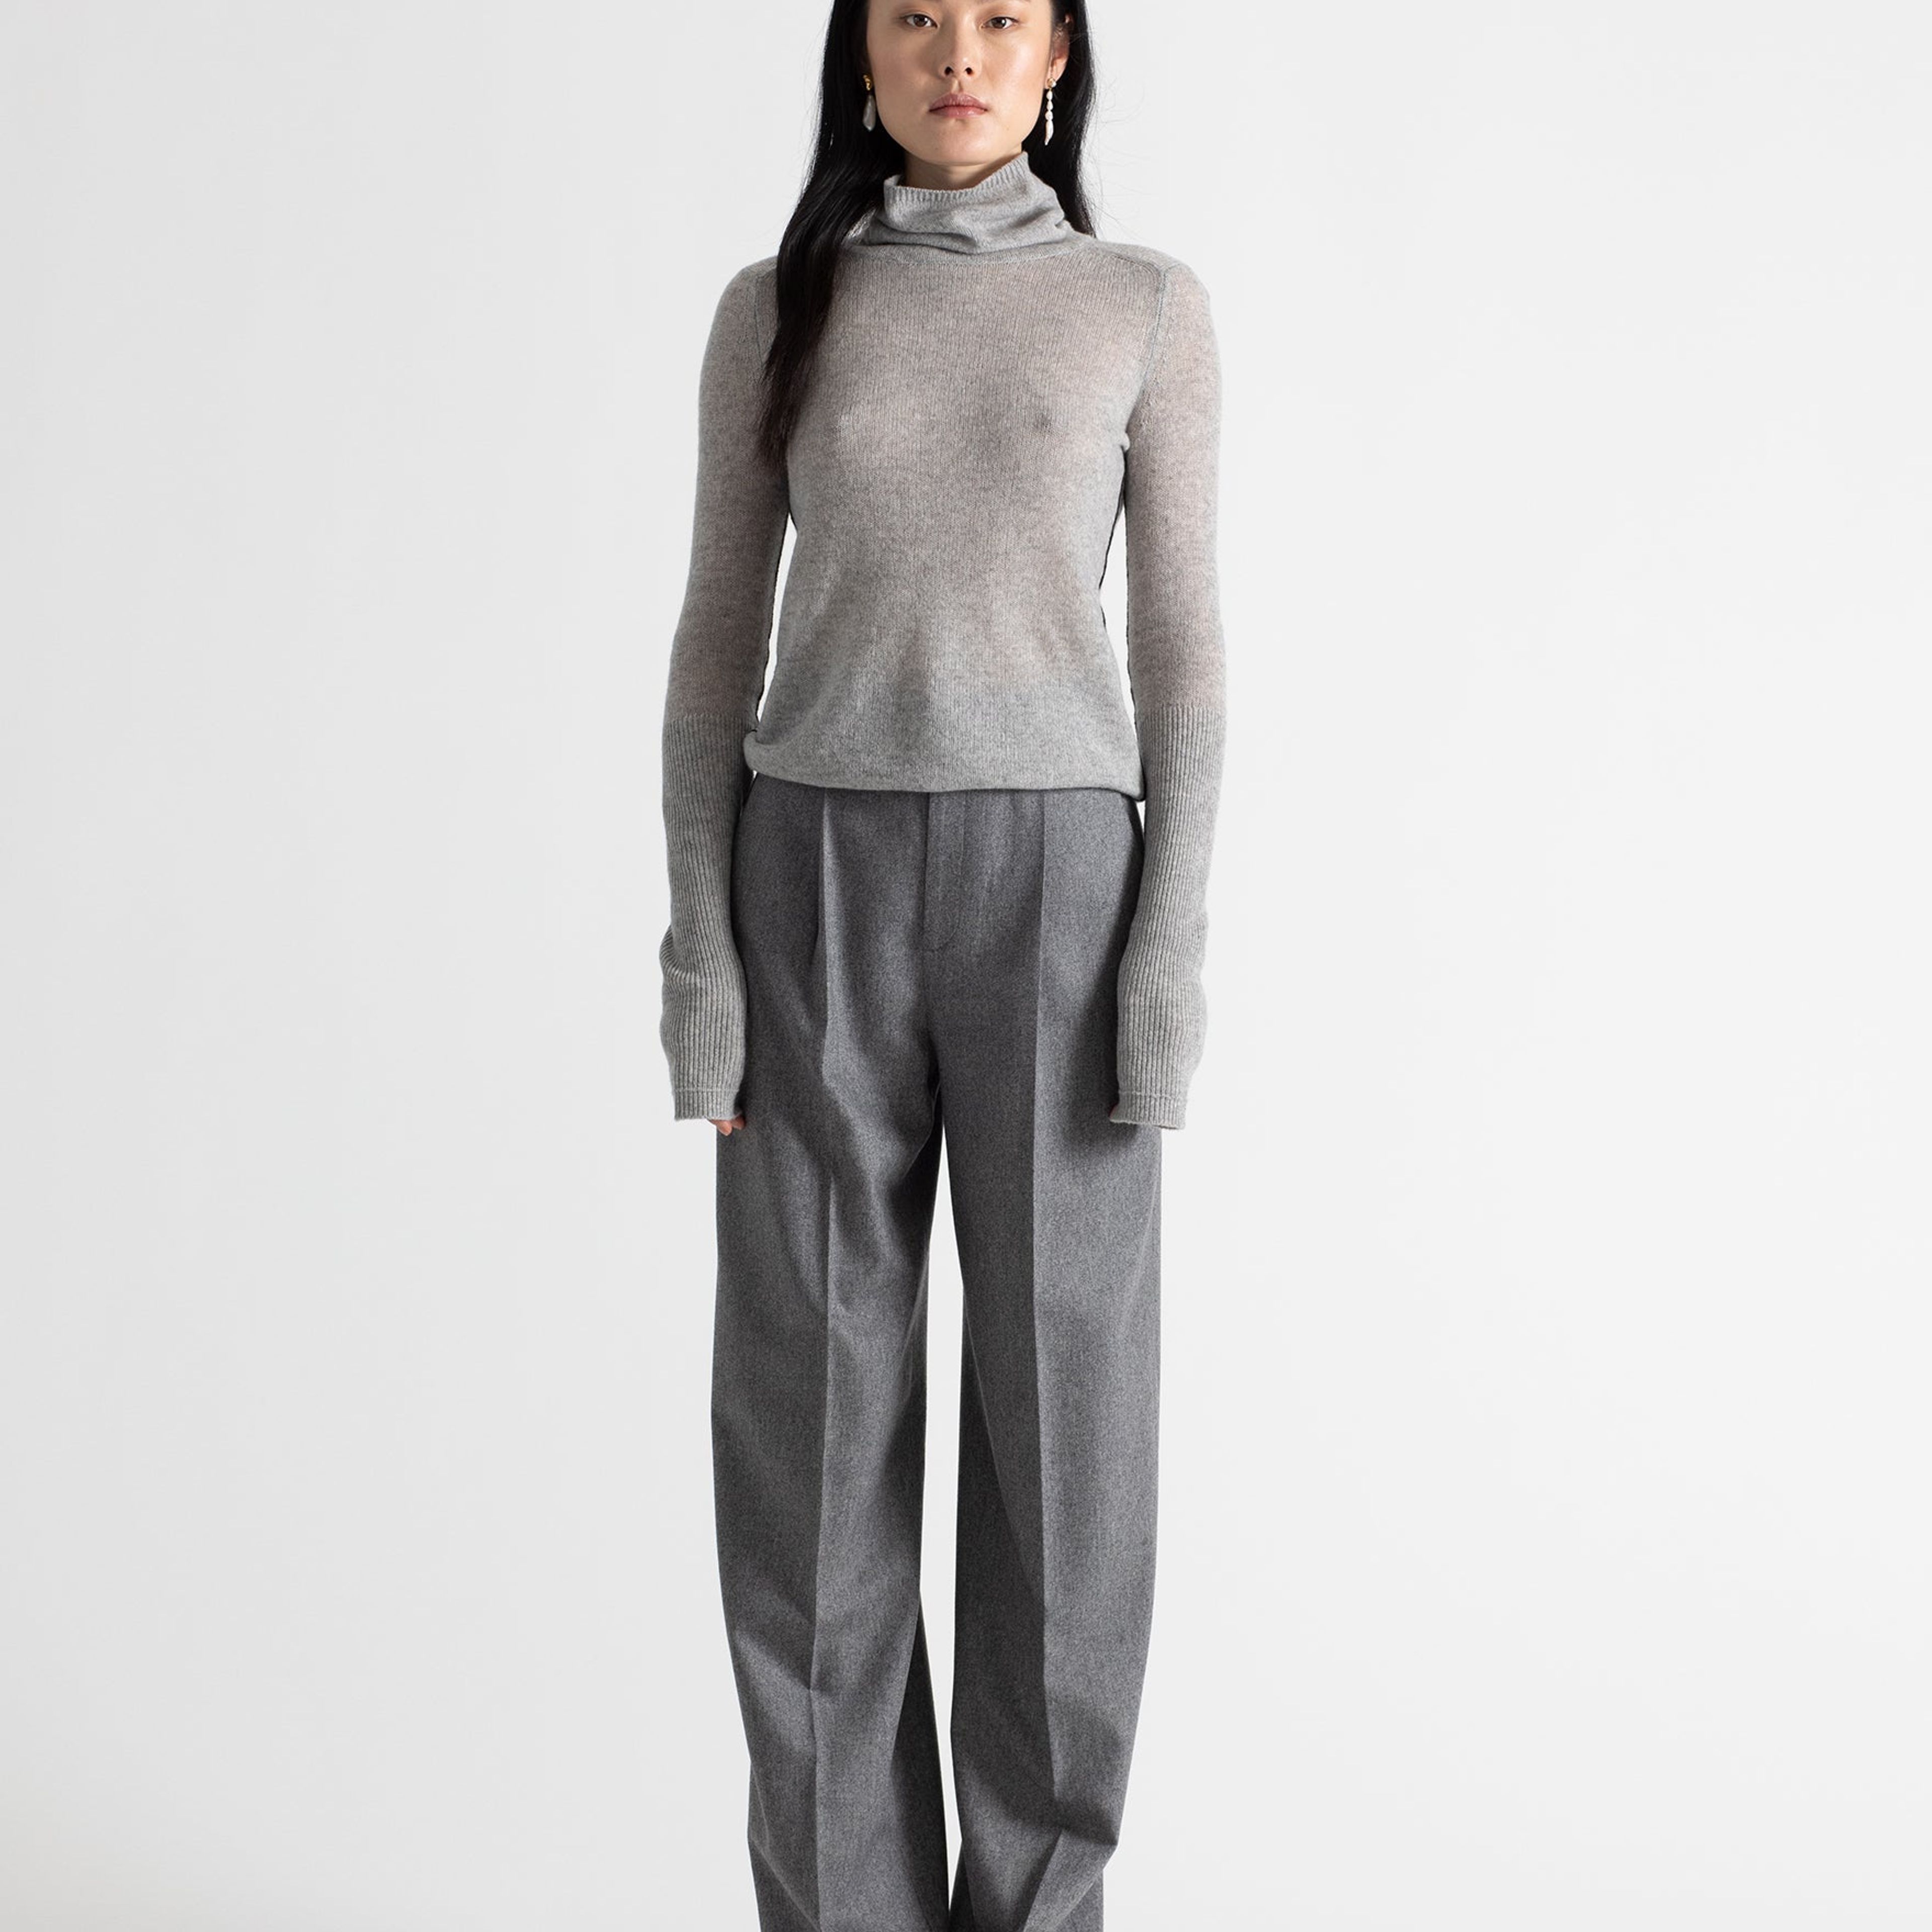 Feather Weight Turtle Neck in Heather Grey